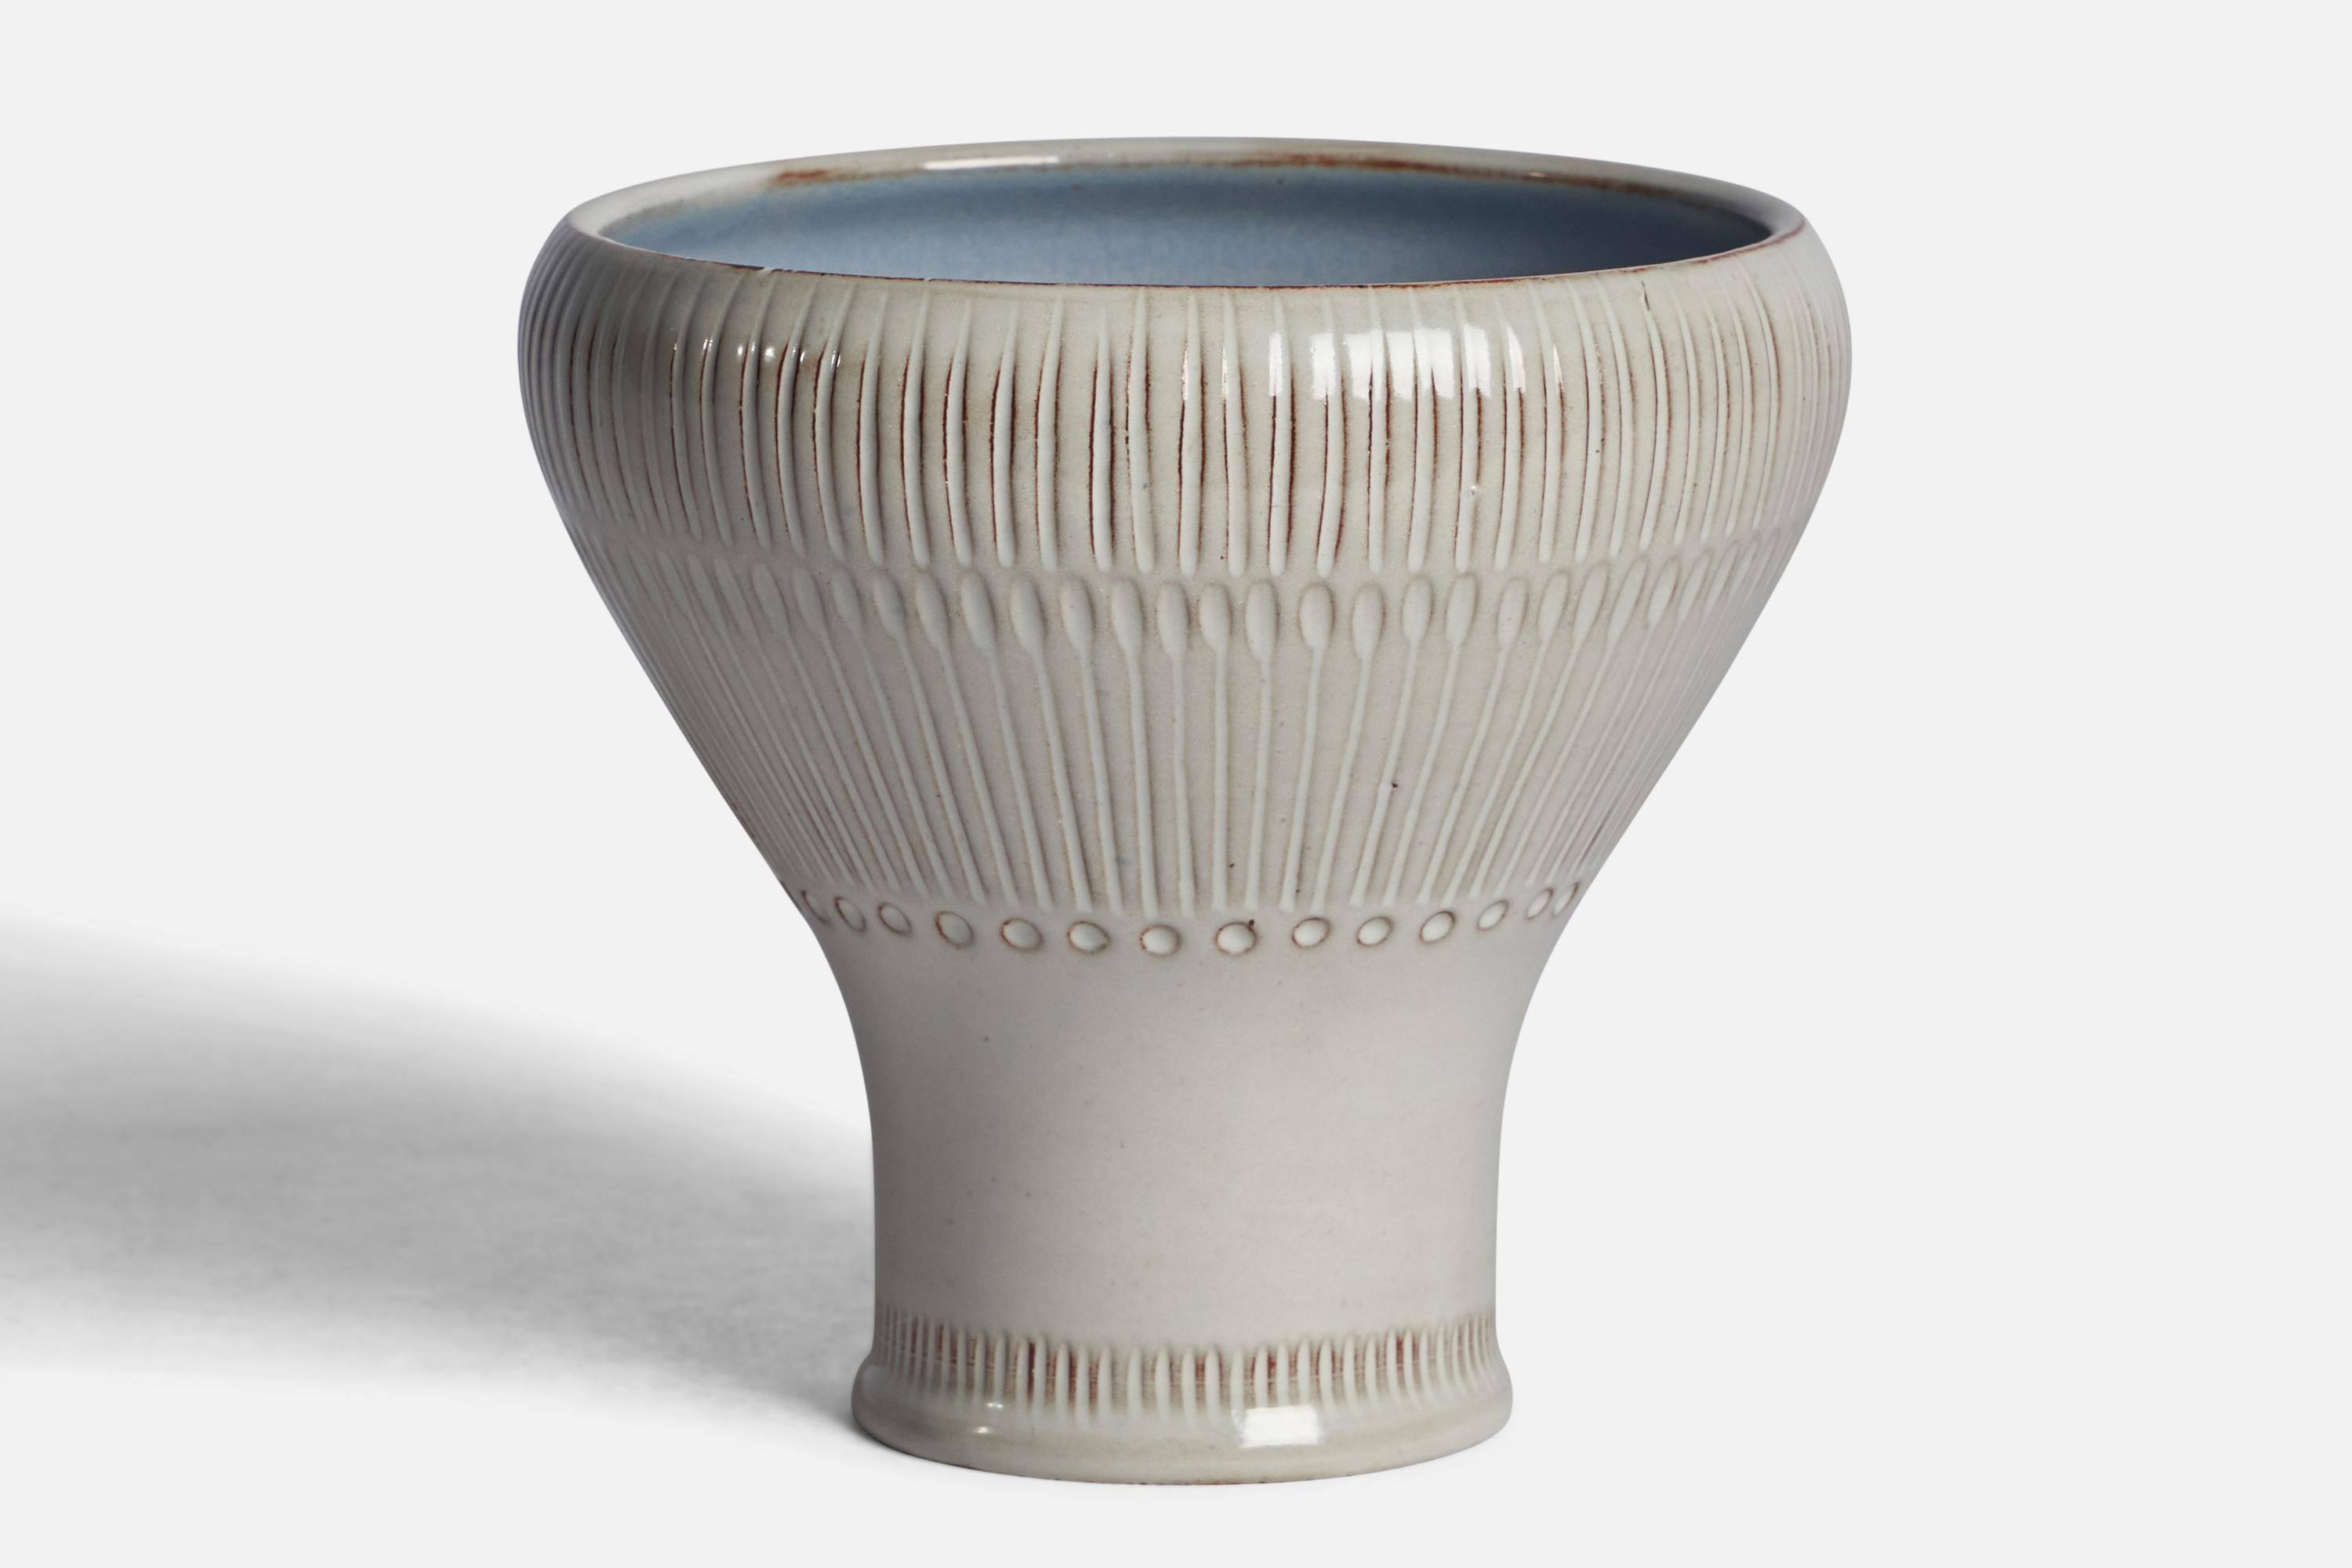 A white and blue-glazed earthenware vase designed by Anna-Lisa Thomson and produced by Upsala Ekeby, Sweden, 1930s.
Old reference #: 397